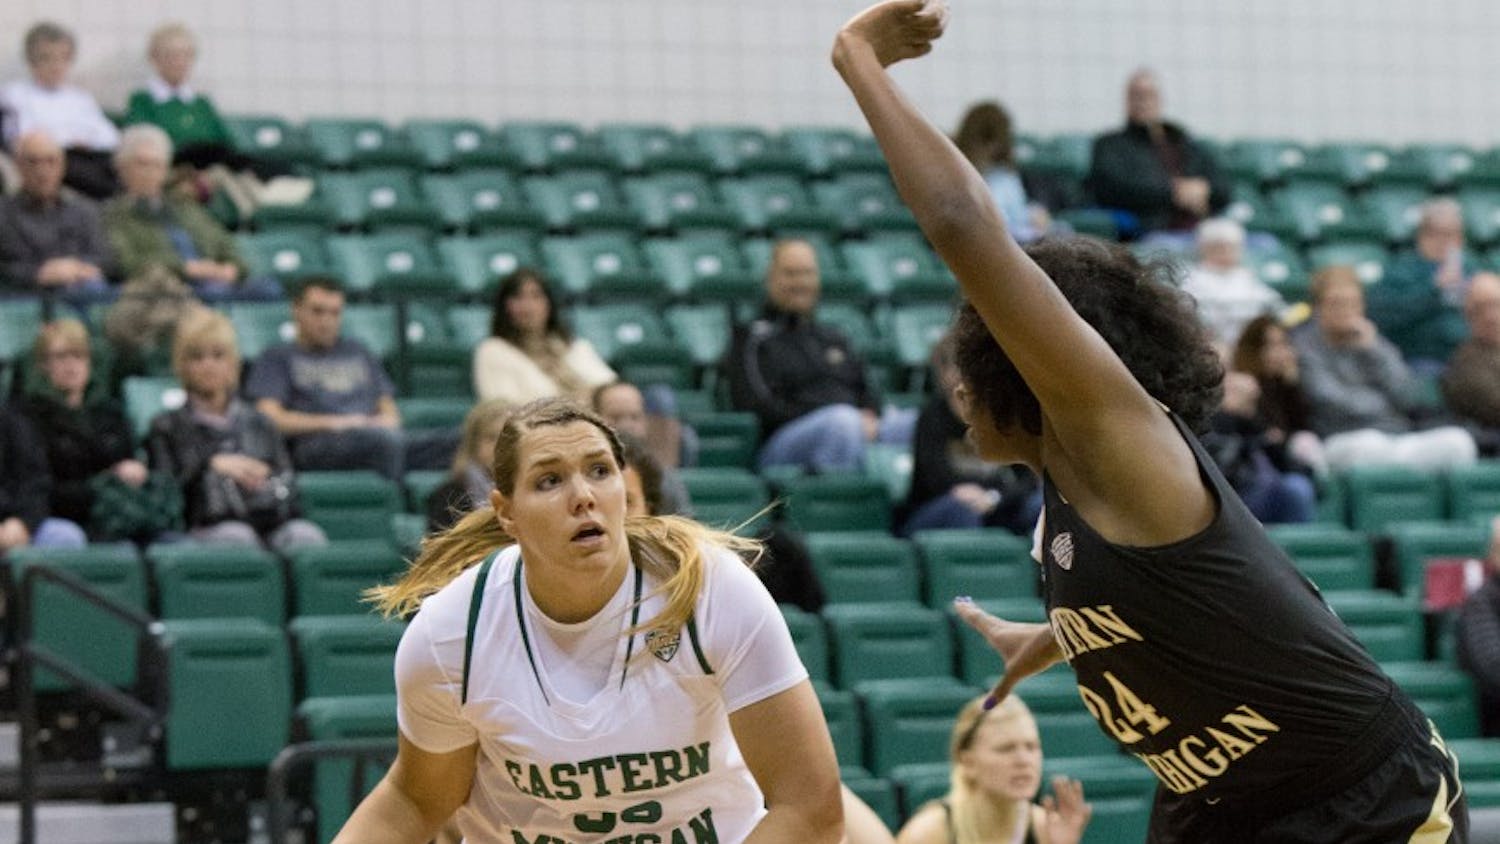 EMU forward Olivia Fouty (33) drives past WMU's Miracle Woods (24) in Eastern Michigan's 83-77 win over Western Michigan Wednesday night. Fouty had 14 points.